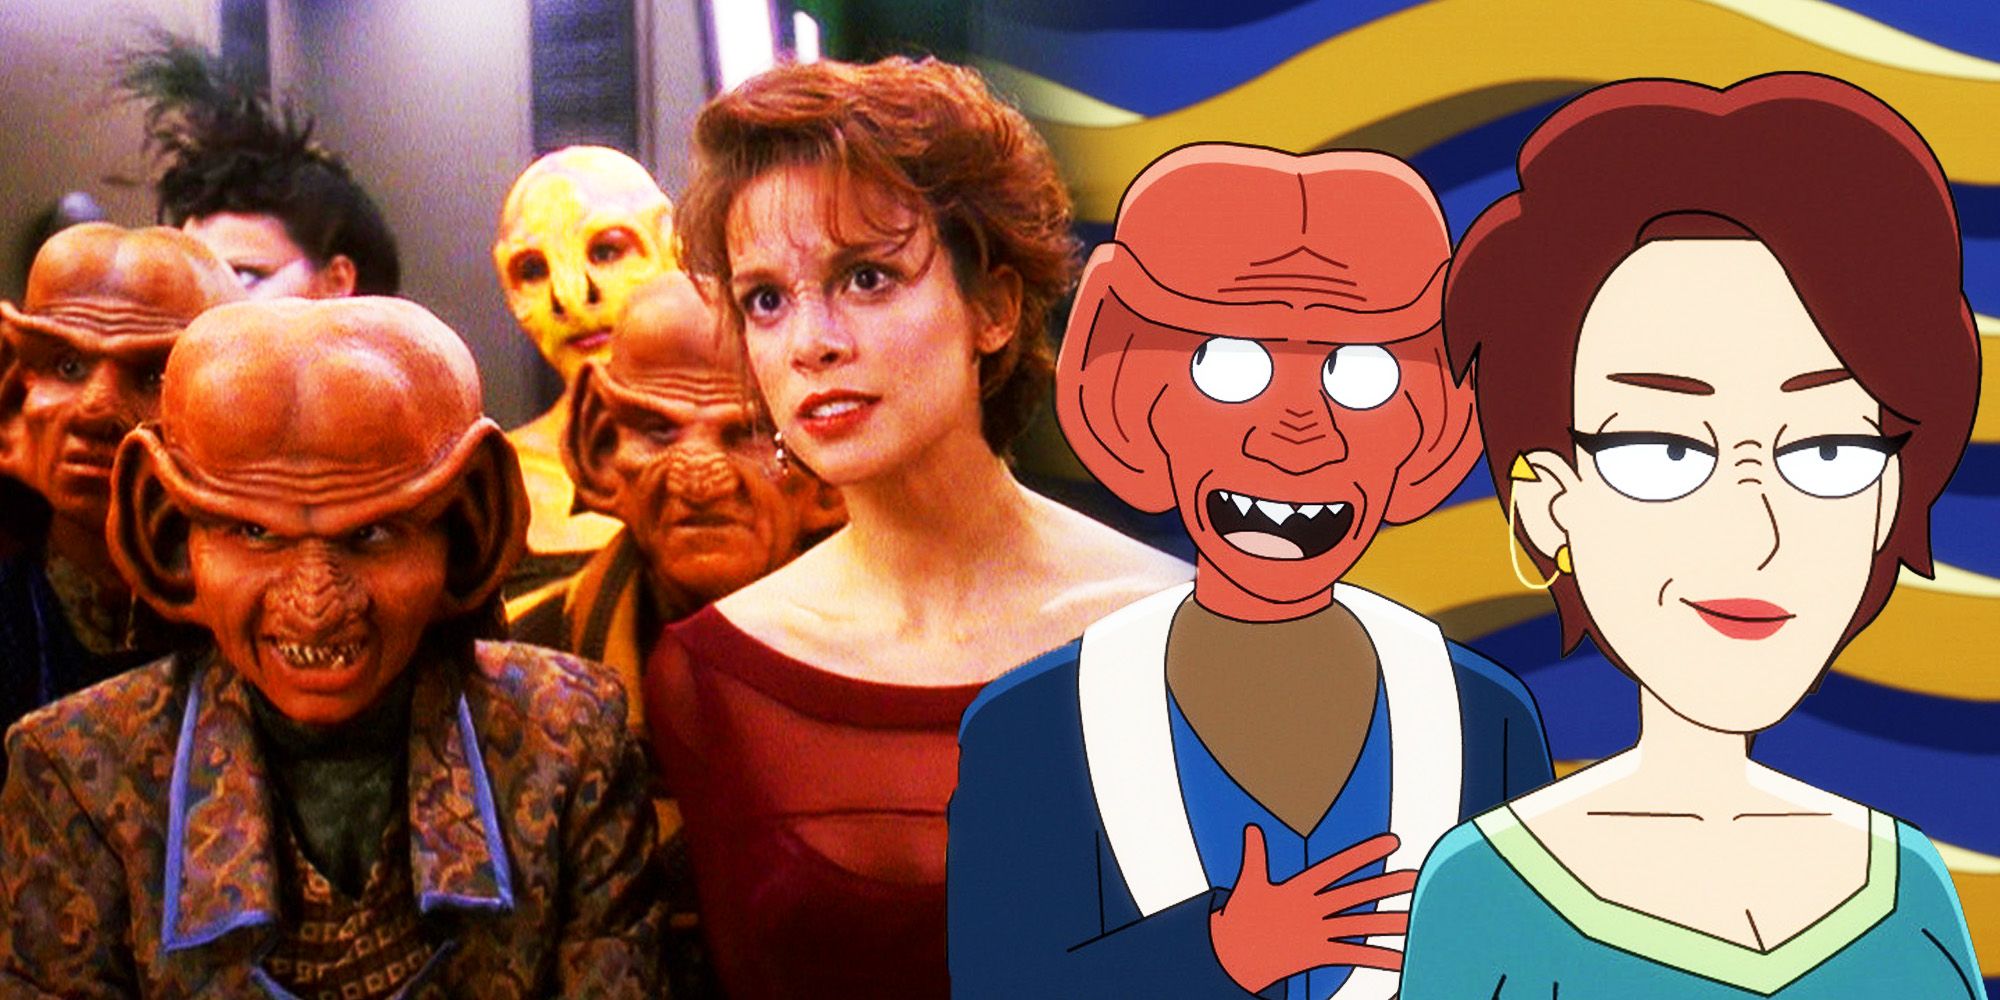 Star Trek: Lower Decks season 4 brought back Deep Space Nine's RomMax Grodénchik as Rom and Chase Masterson as Leeta on Star Trek: Deep Space Nine (live-action) and in Lower Decks (animated)